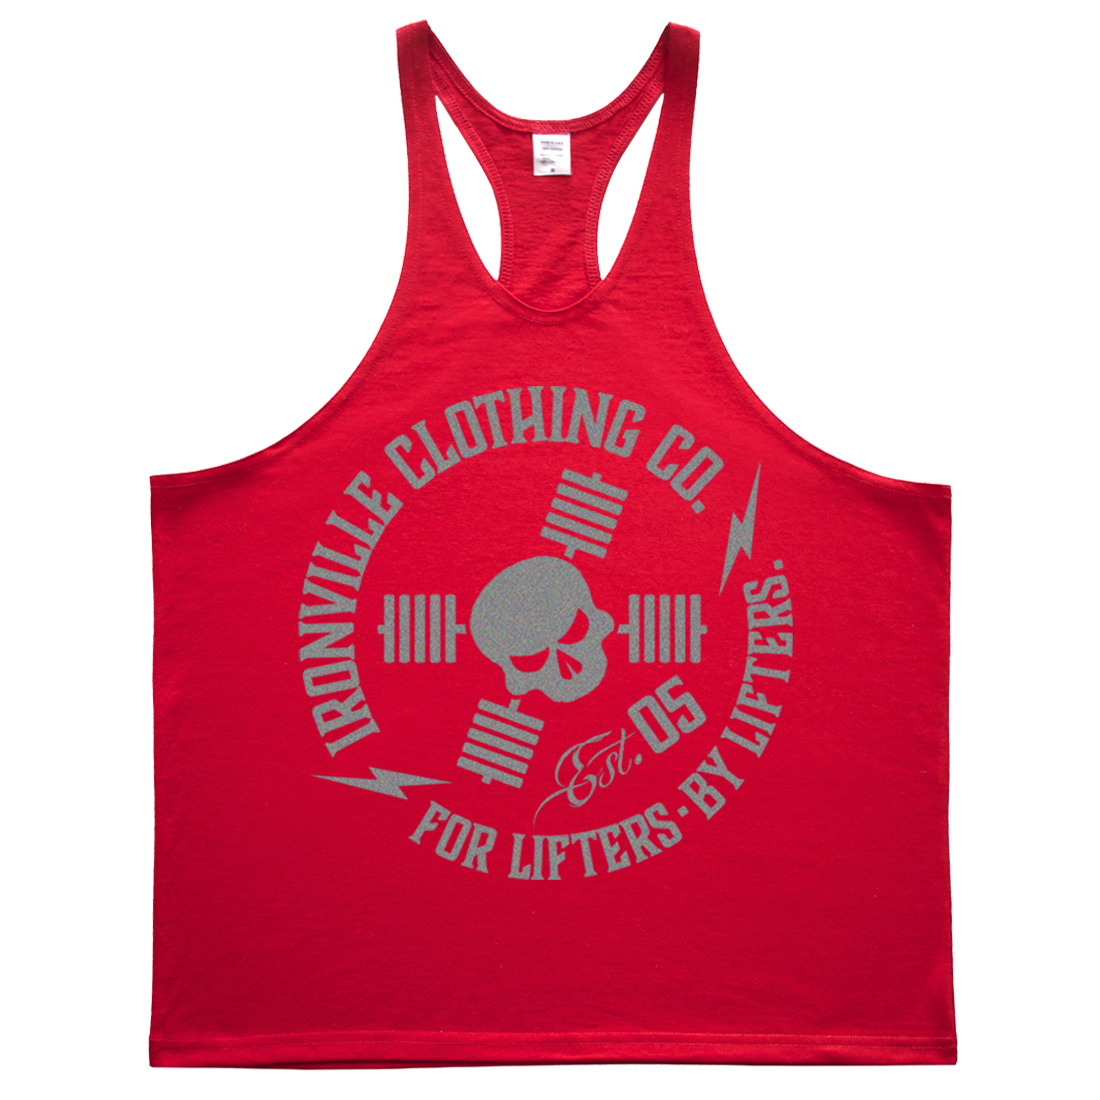 Ironville For Lifters By Lifters Powerlifting Stringer Tank Top